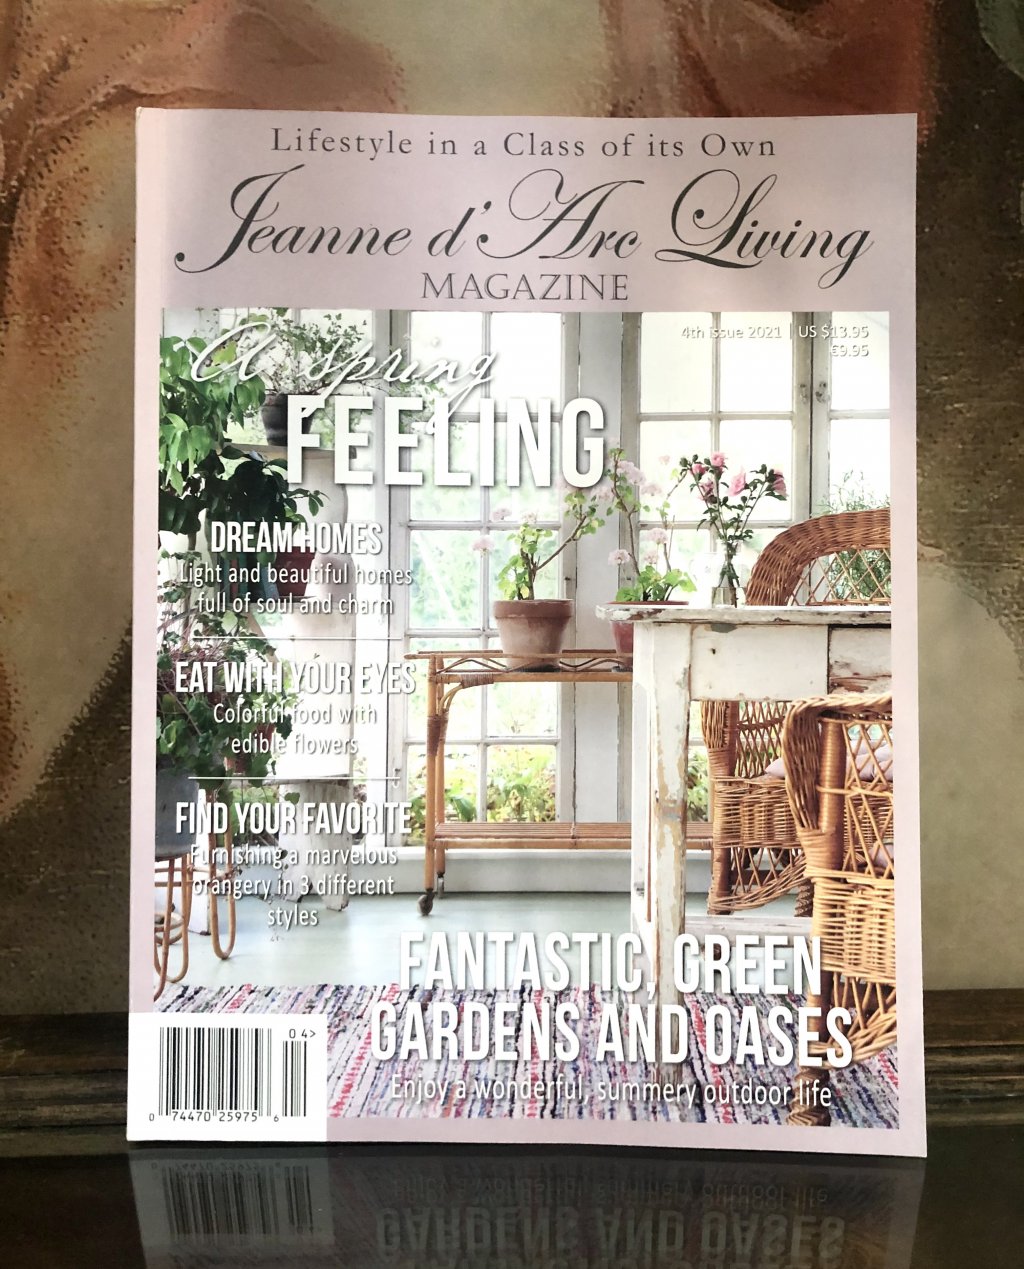 Jeanne d'Arc Living Magazine | Issue 4| 2021